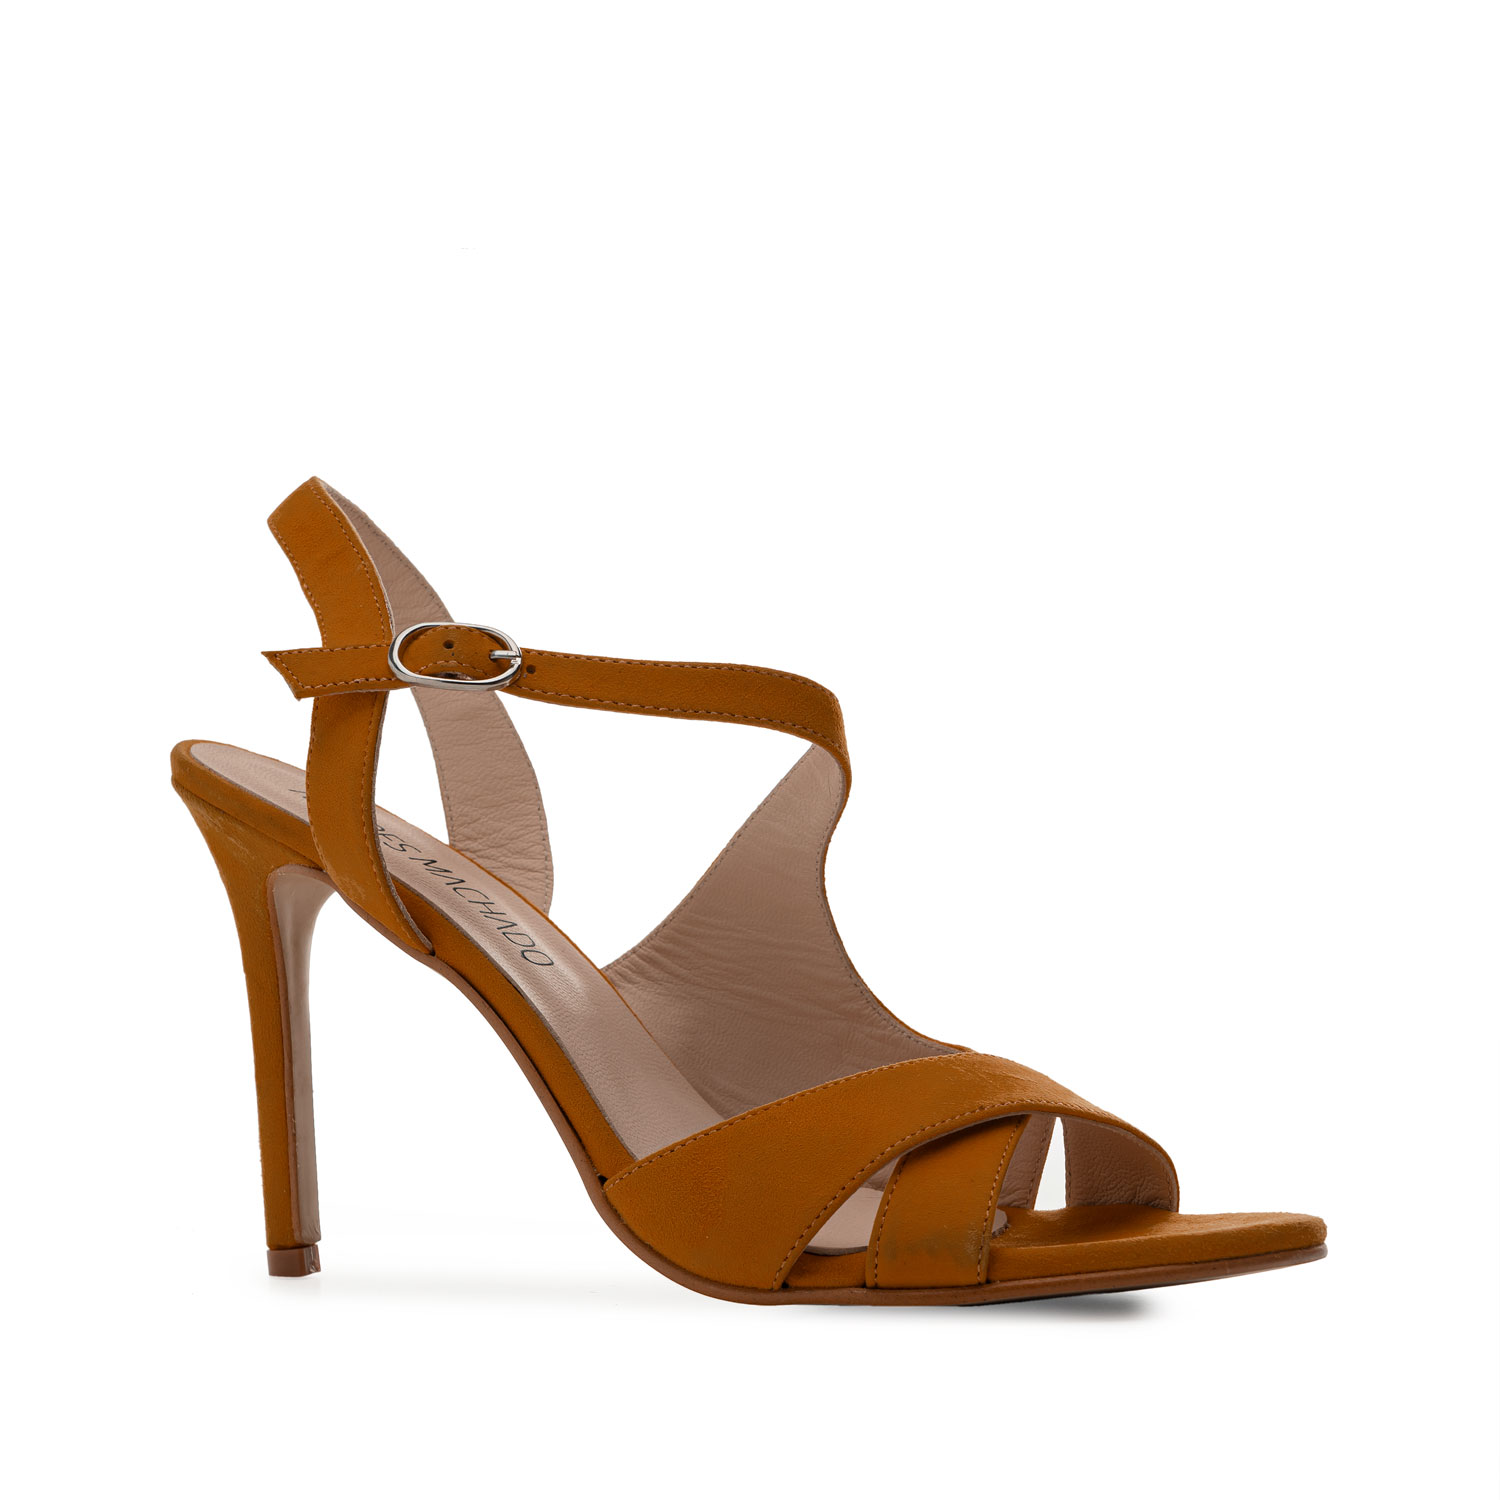 Stiletto Sandals in Camel Suede Leather 